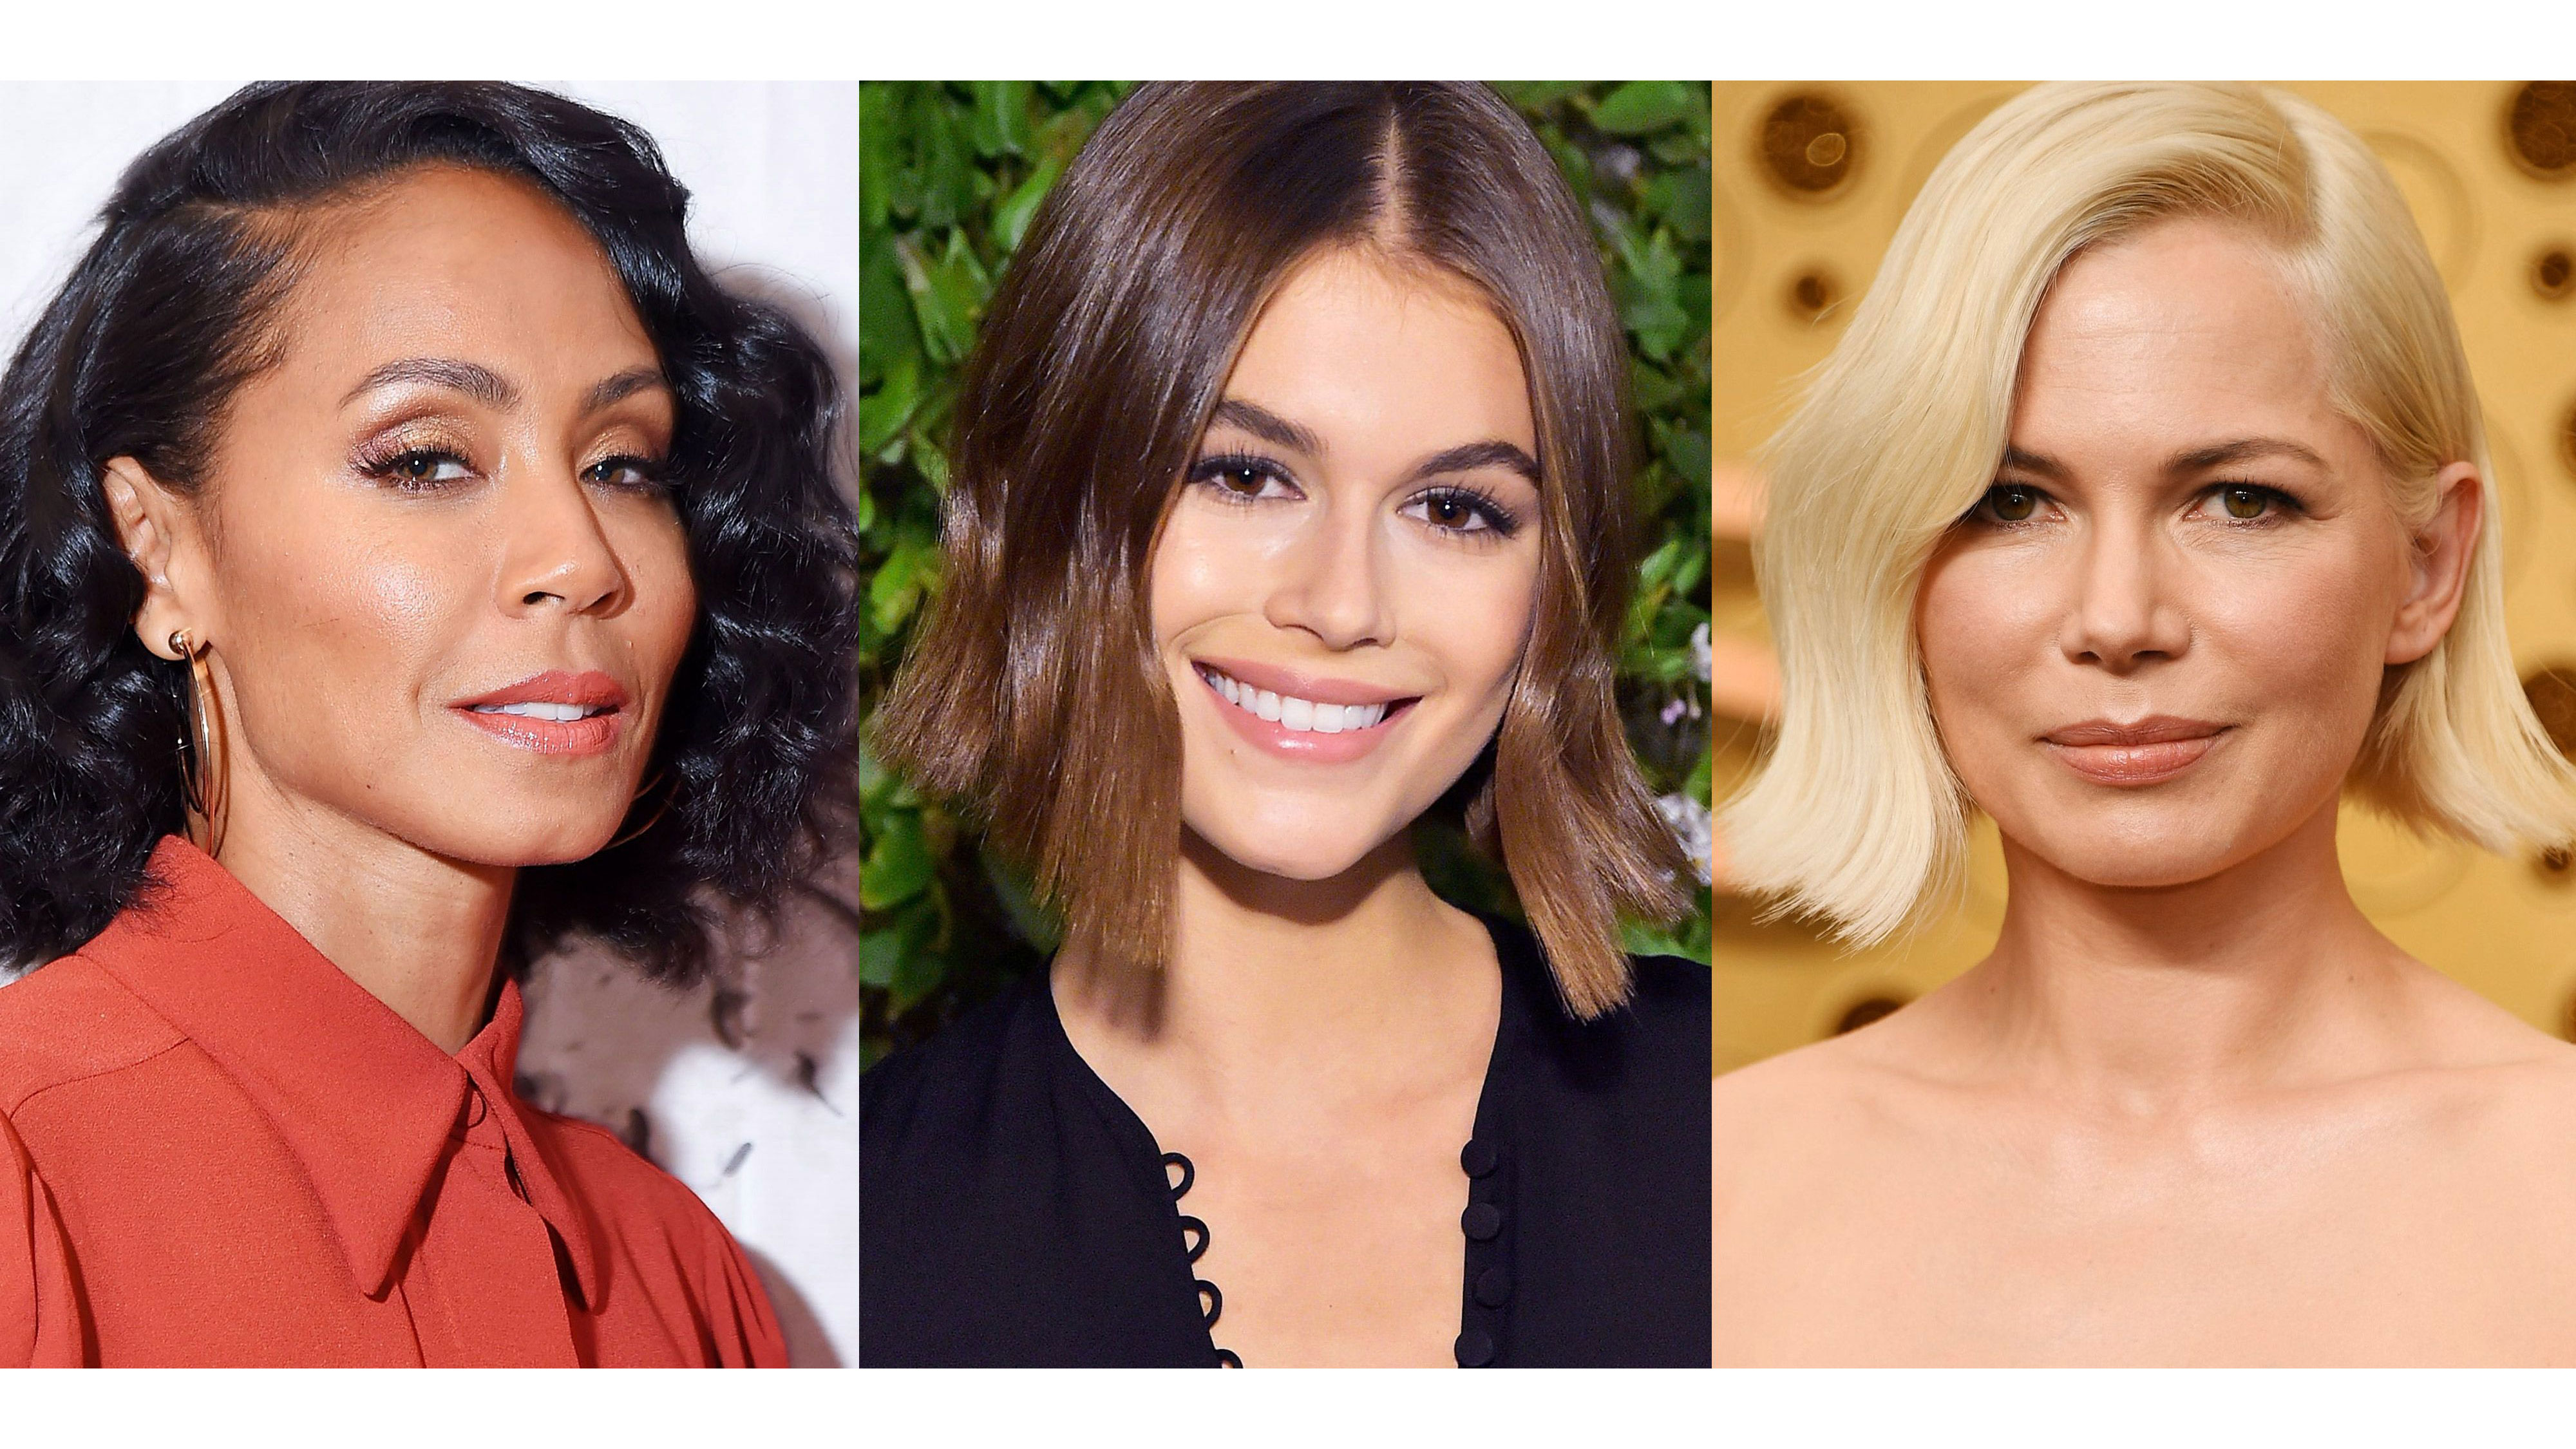 8 Best Bob Haircuts to Try According to Stylists